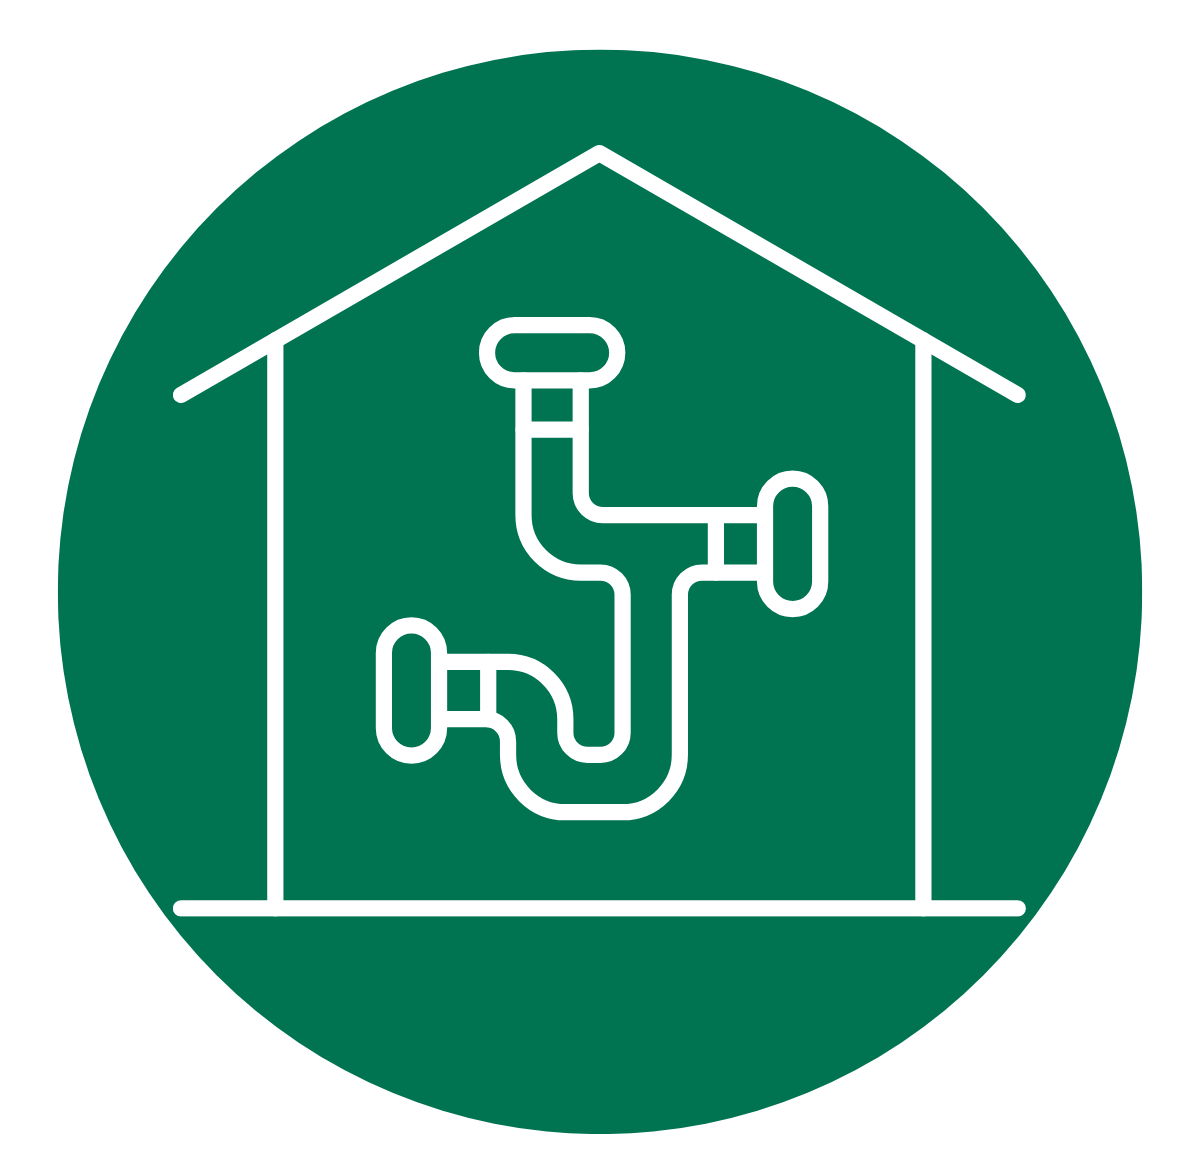 Graphic icon of a home with plumbing in the middle of it. All is set against a green circle background.